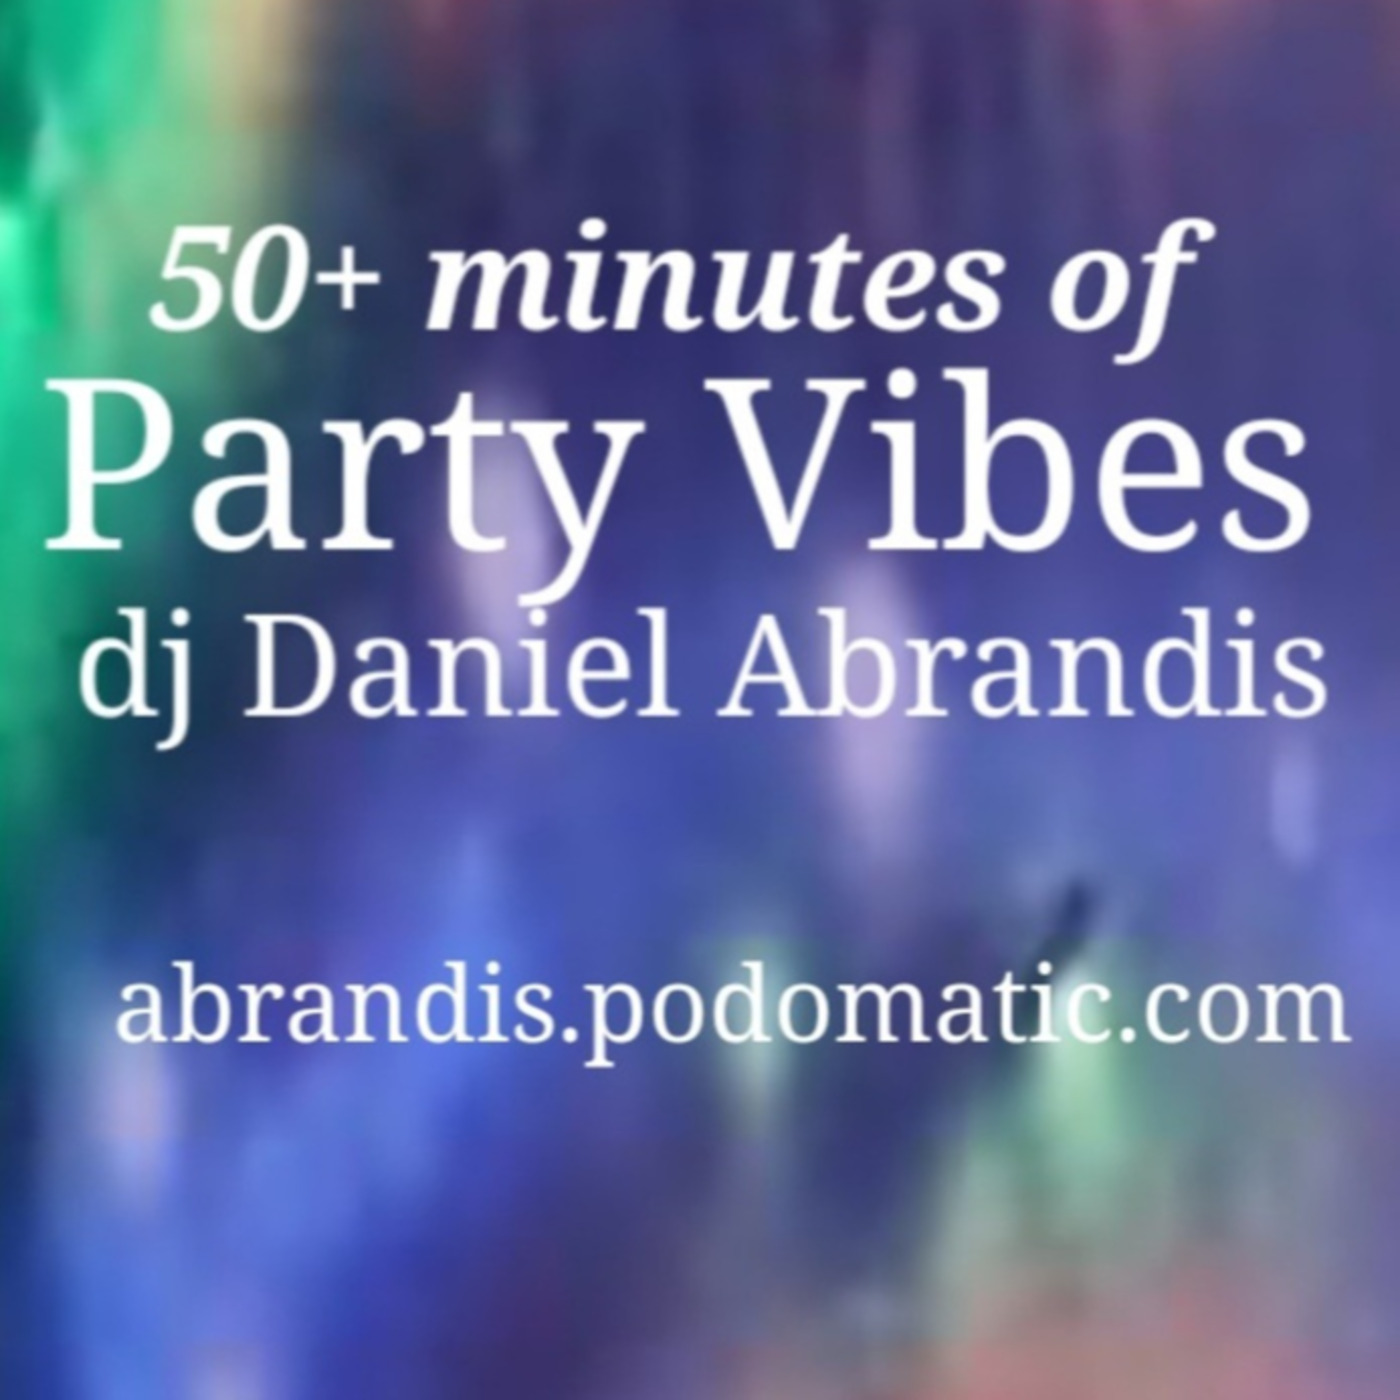 Episode 41: 50+ minutes of Party Vibes2